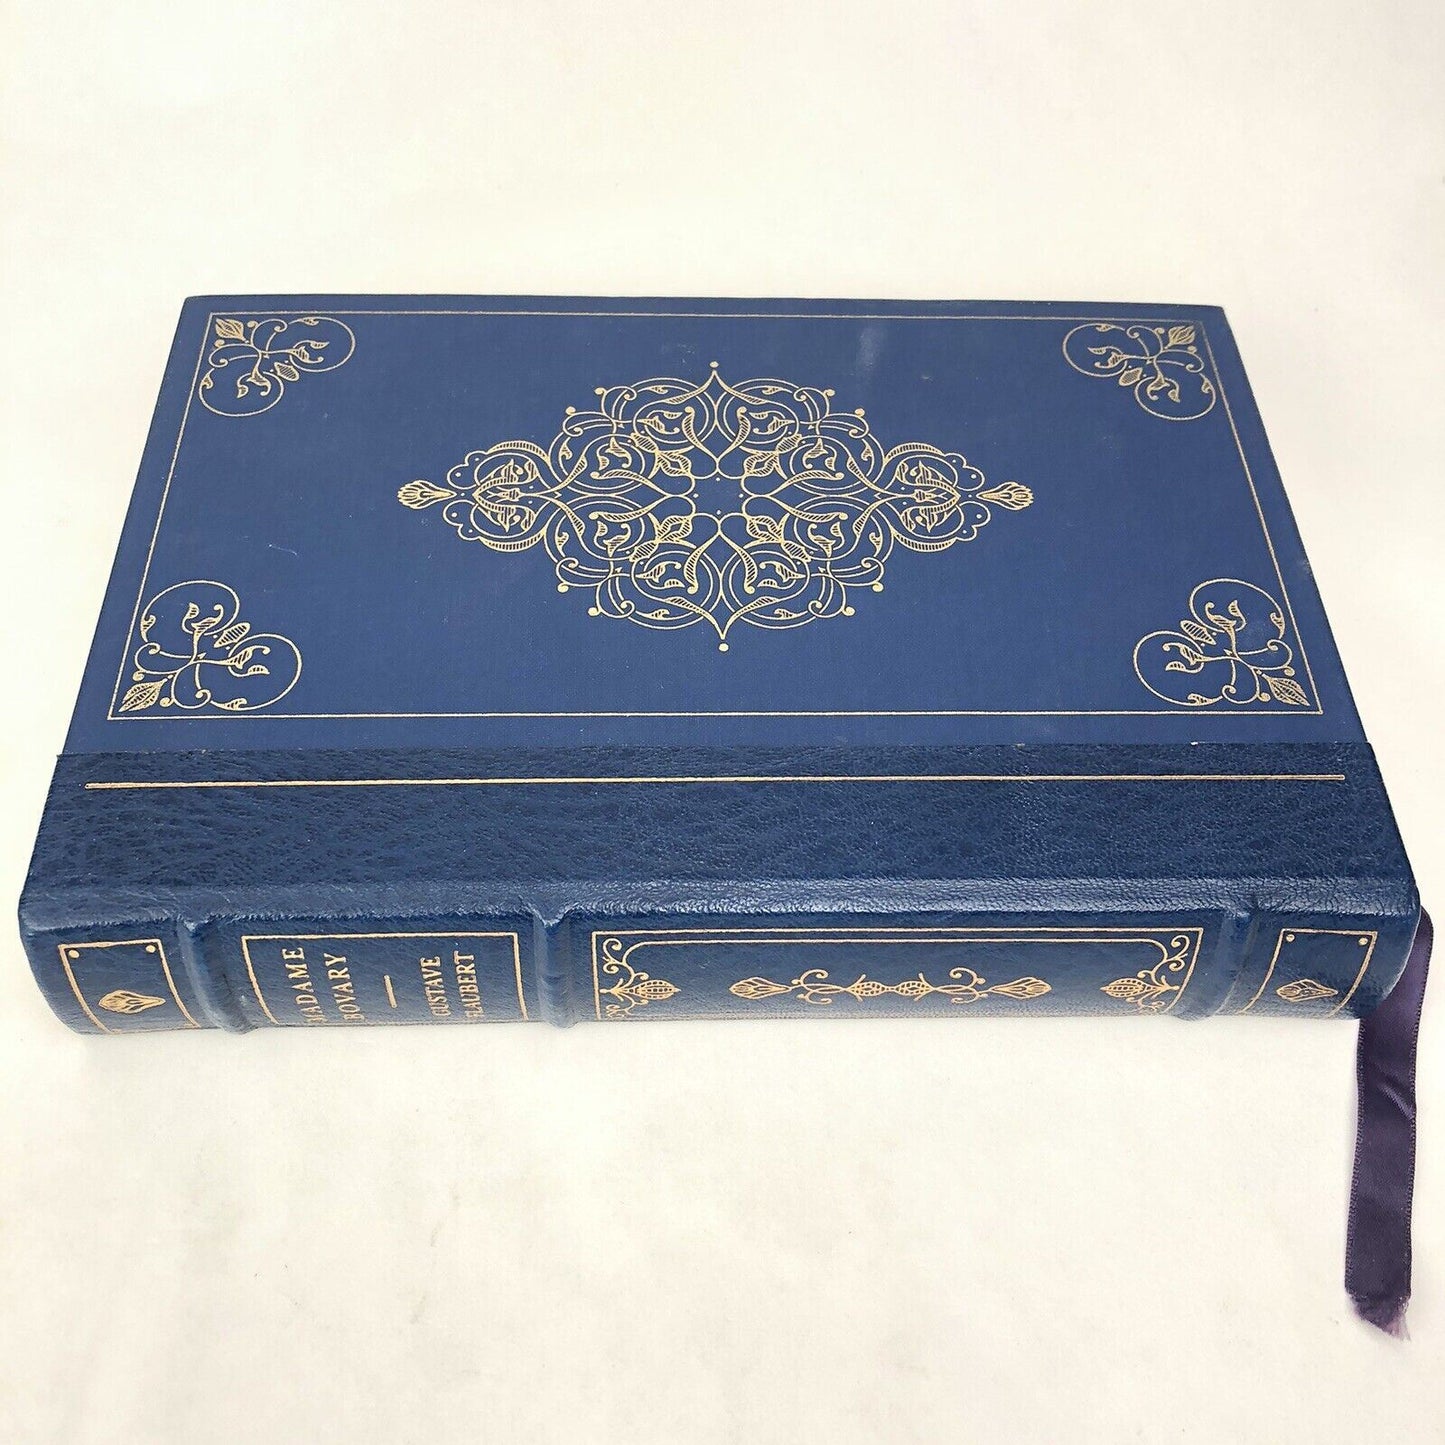 Franklin Library MADAME BOVARY 1957 Gustave Flaubert 1979 1/4 Leather Bound